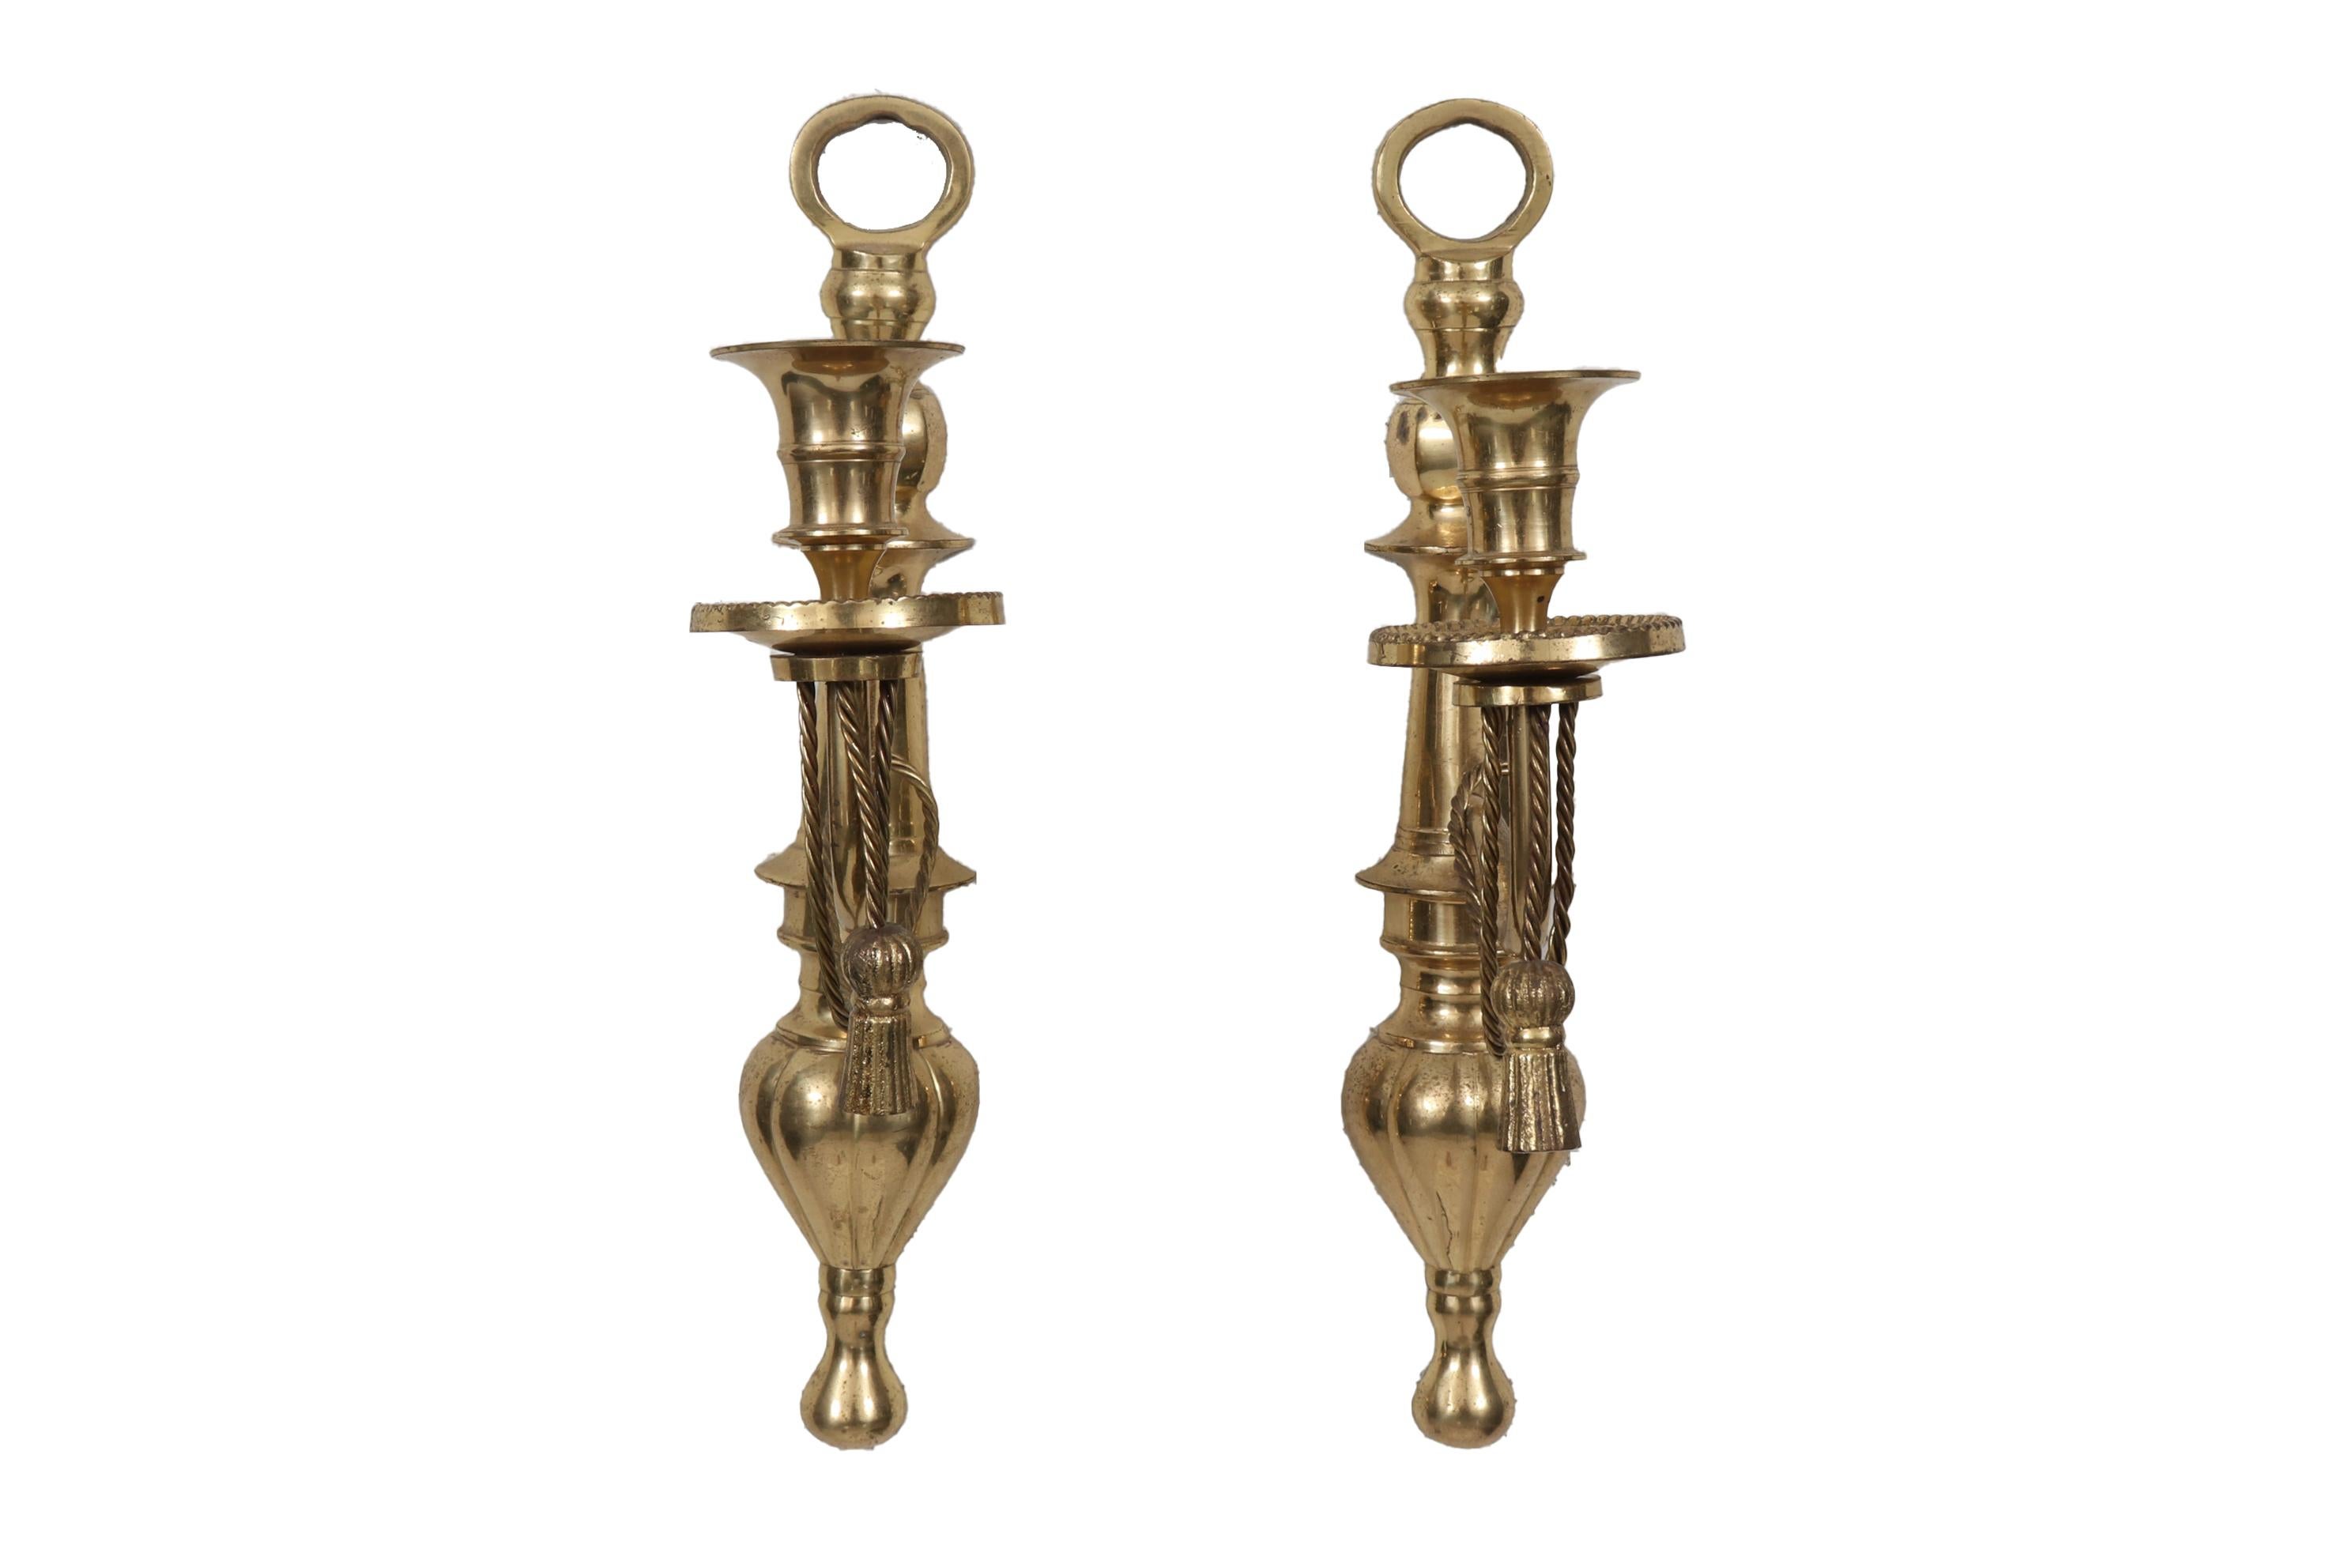 A pair of Regency style brass candlestick sconces. Slender curved arms that support a single capital are decorated with brass tassels and rope. Supported on turned baluster shaped back plates. Dimensions per sconce.